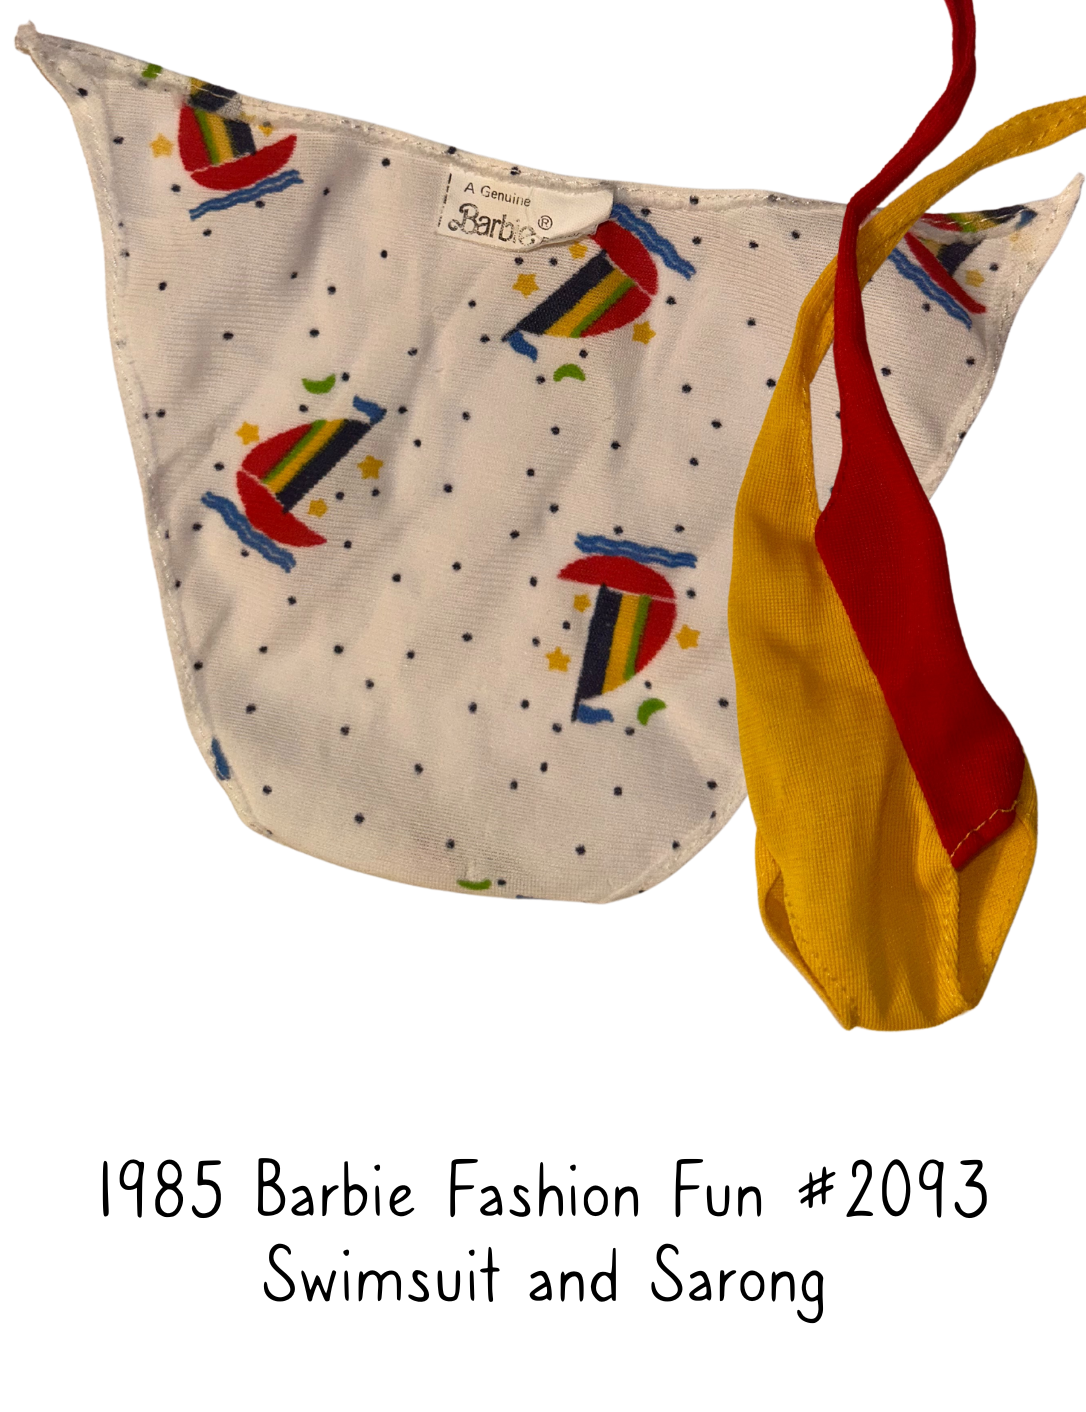 1985 Barbie Fashion Fun #2093 Red and Yellow Swimsuit and Sailboat Sarong